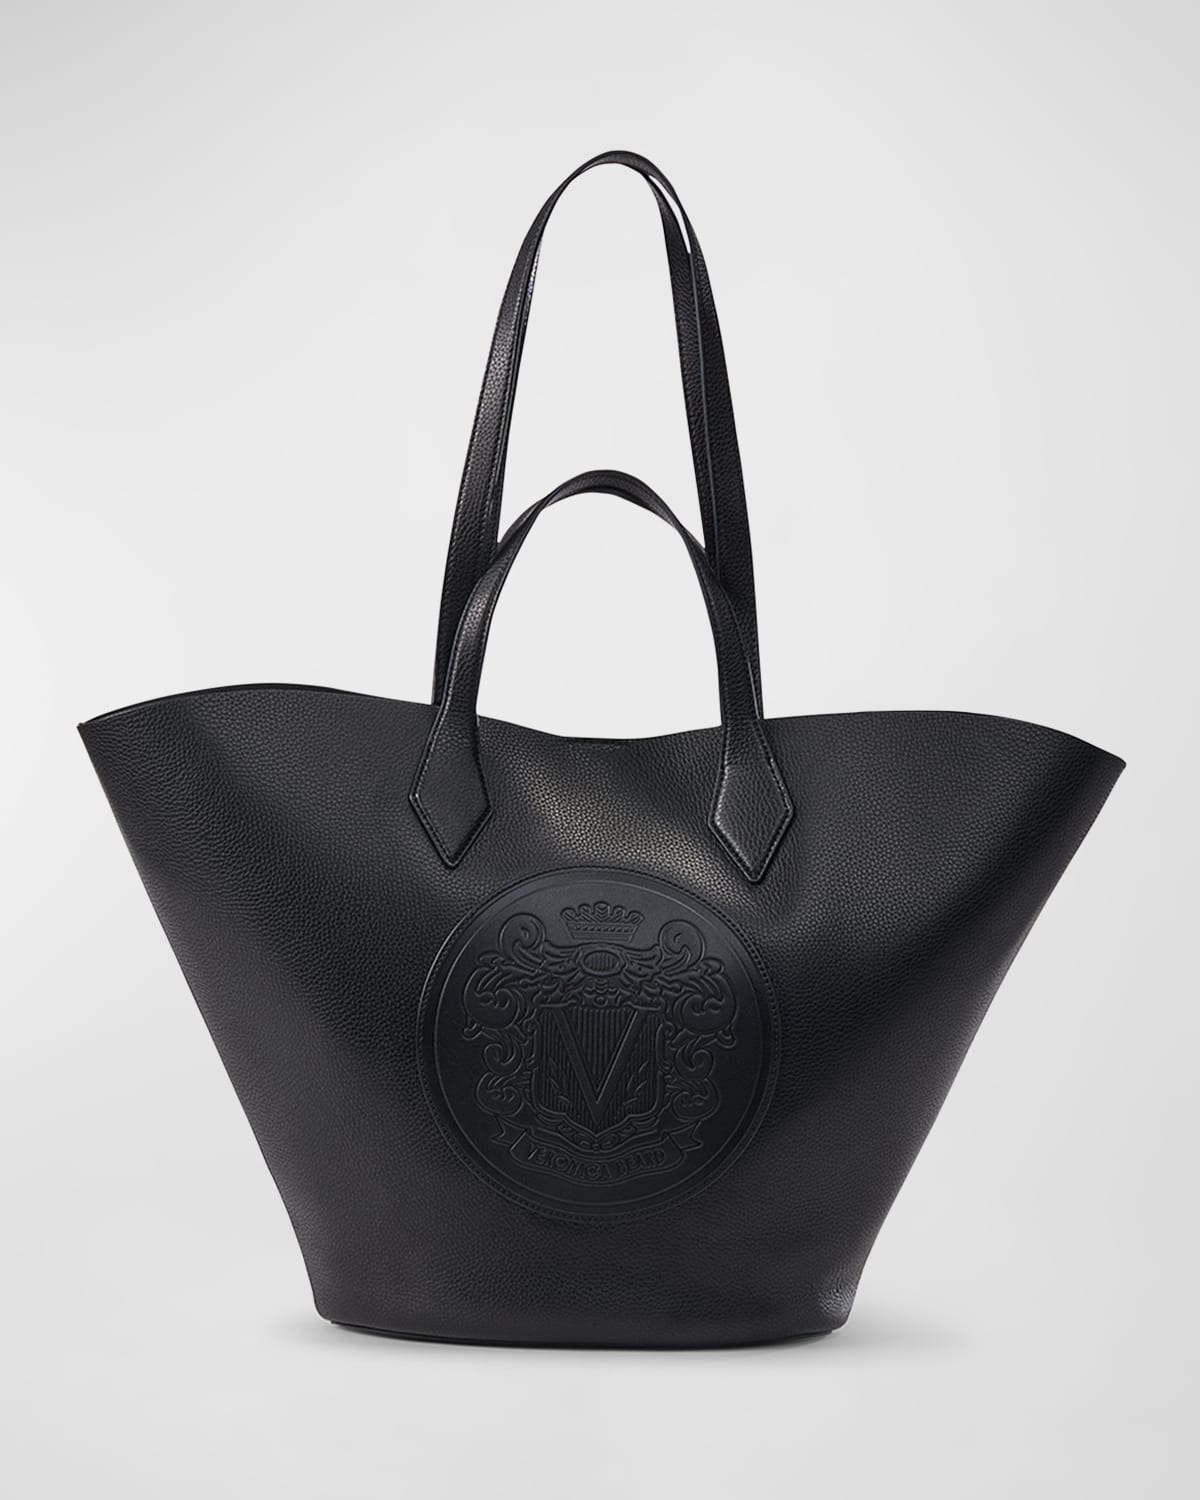 VERONICA BEARD THE CREST LARGE LEATHER TOTE BAG